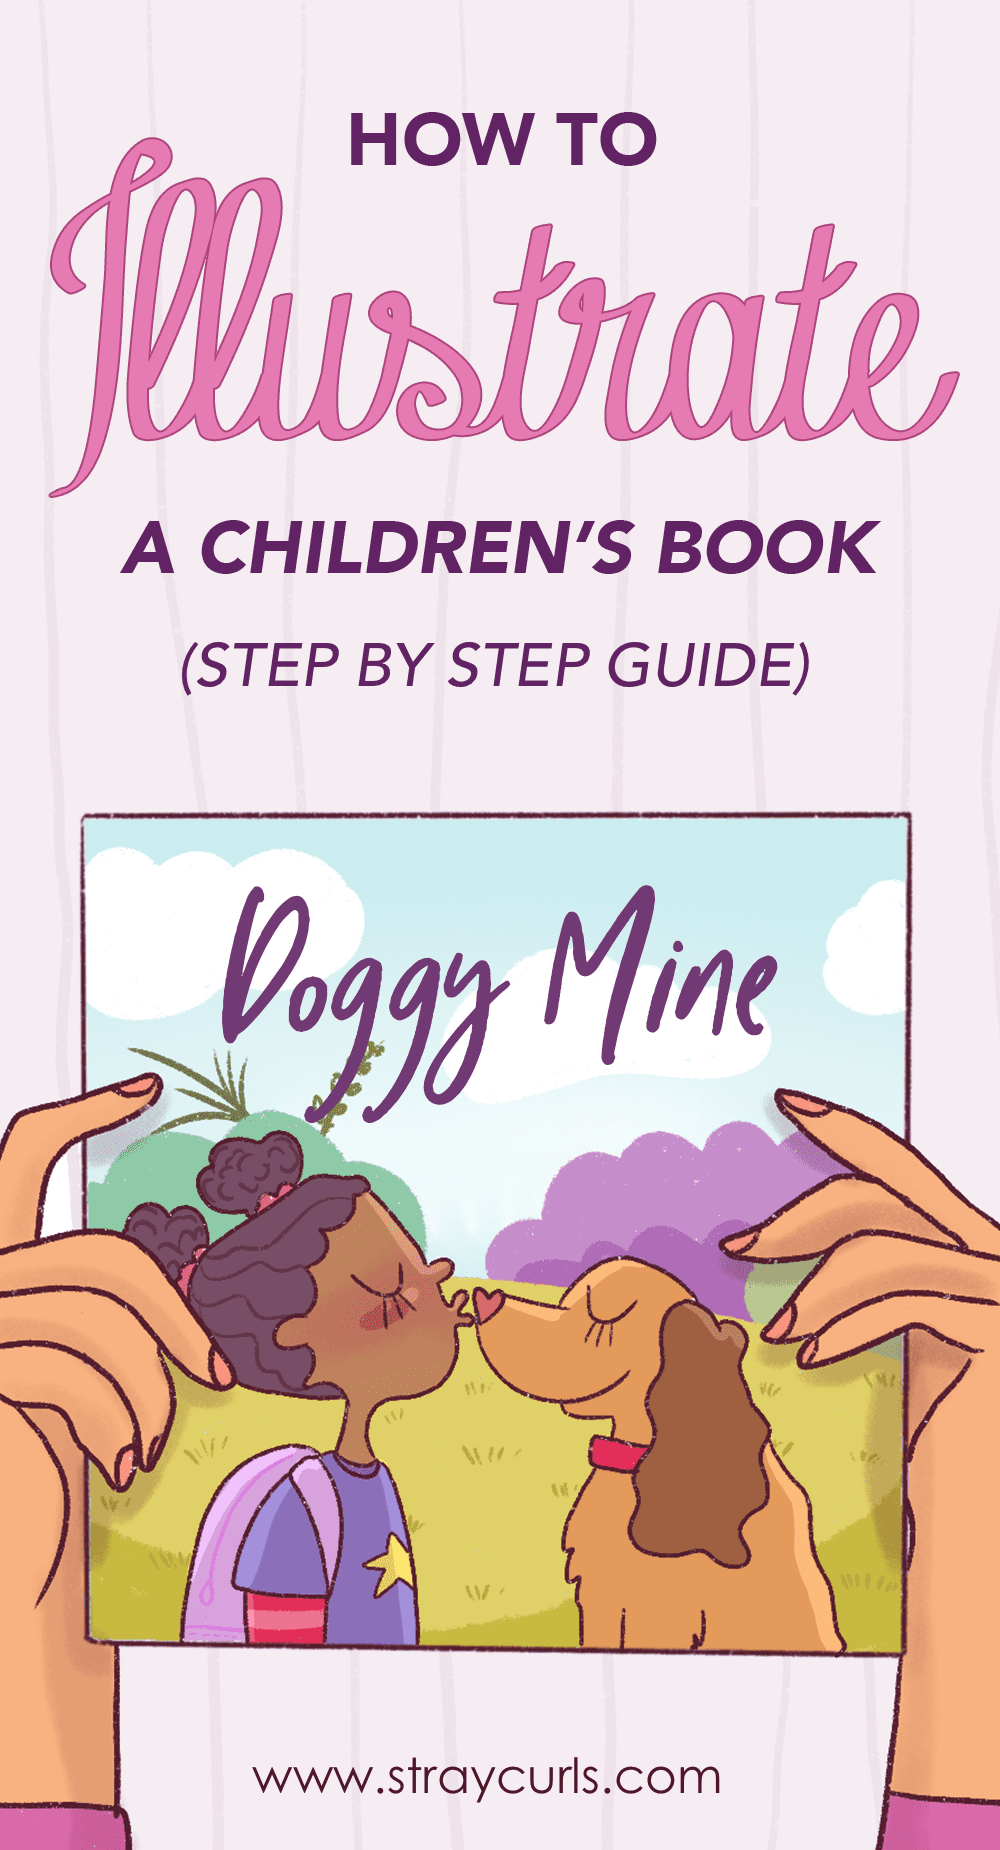 How to illustrate a children's book - a step by step guide!